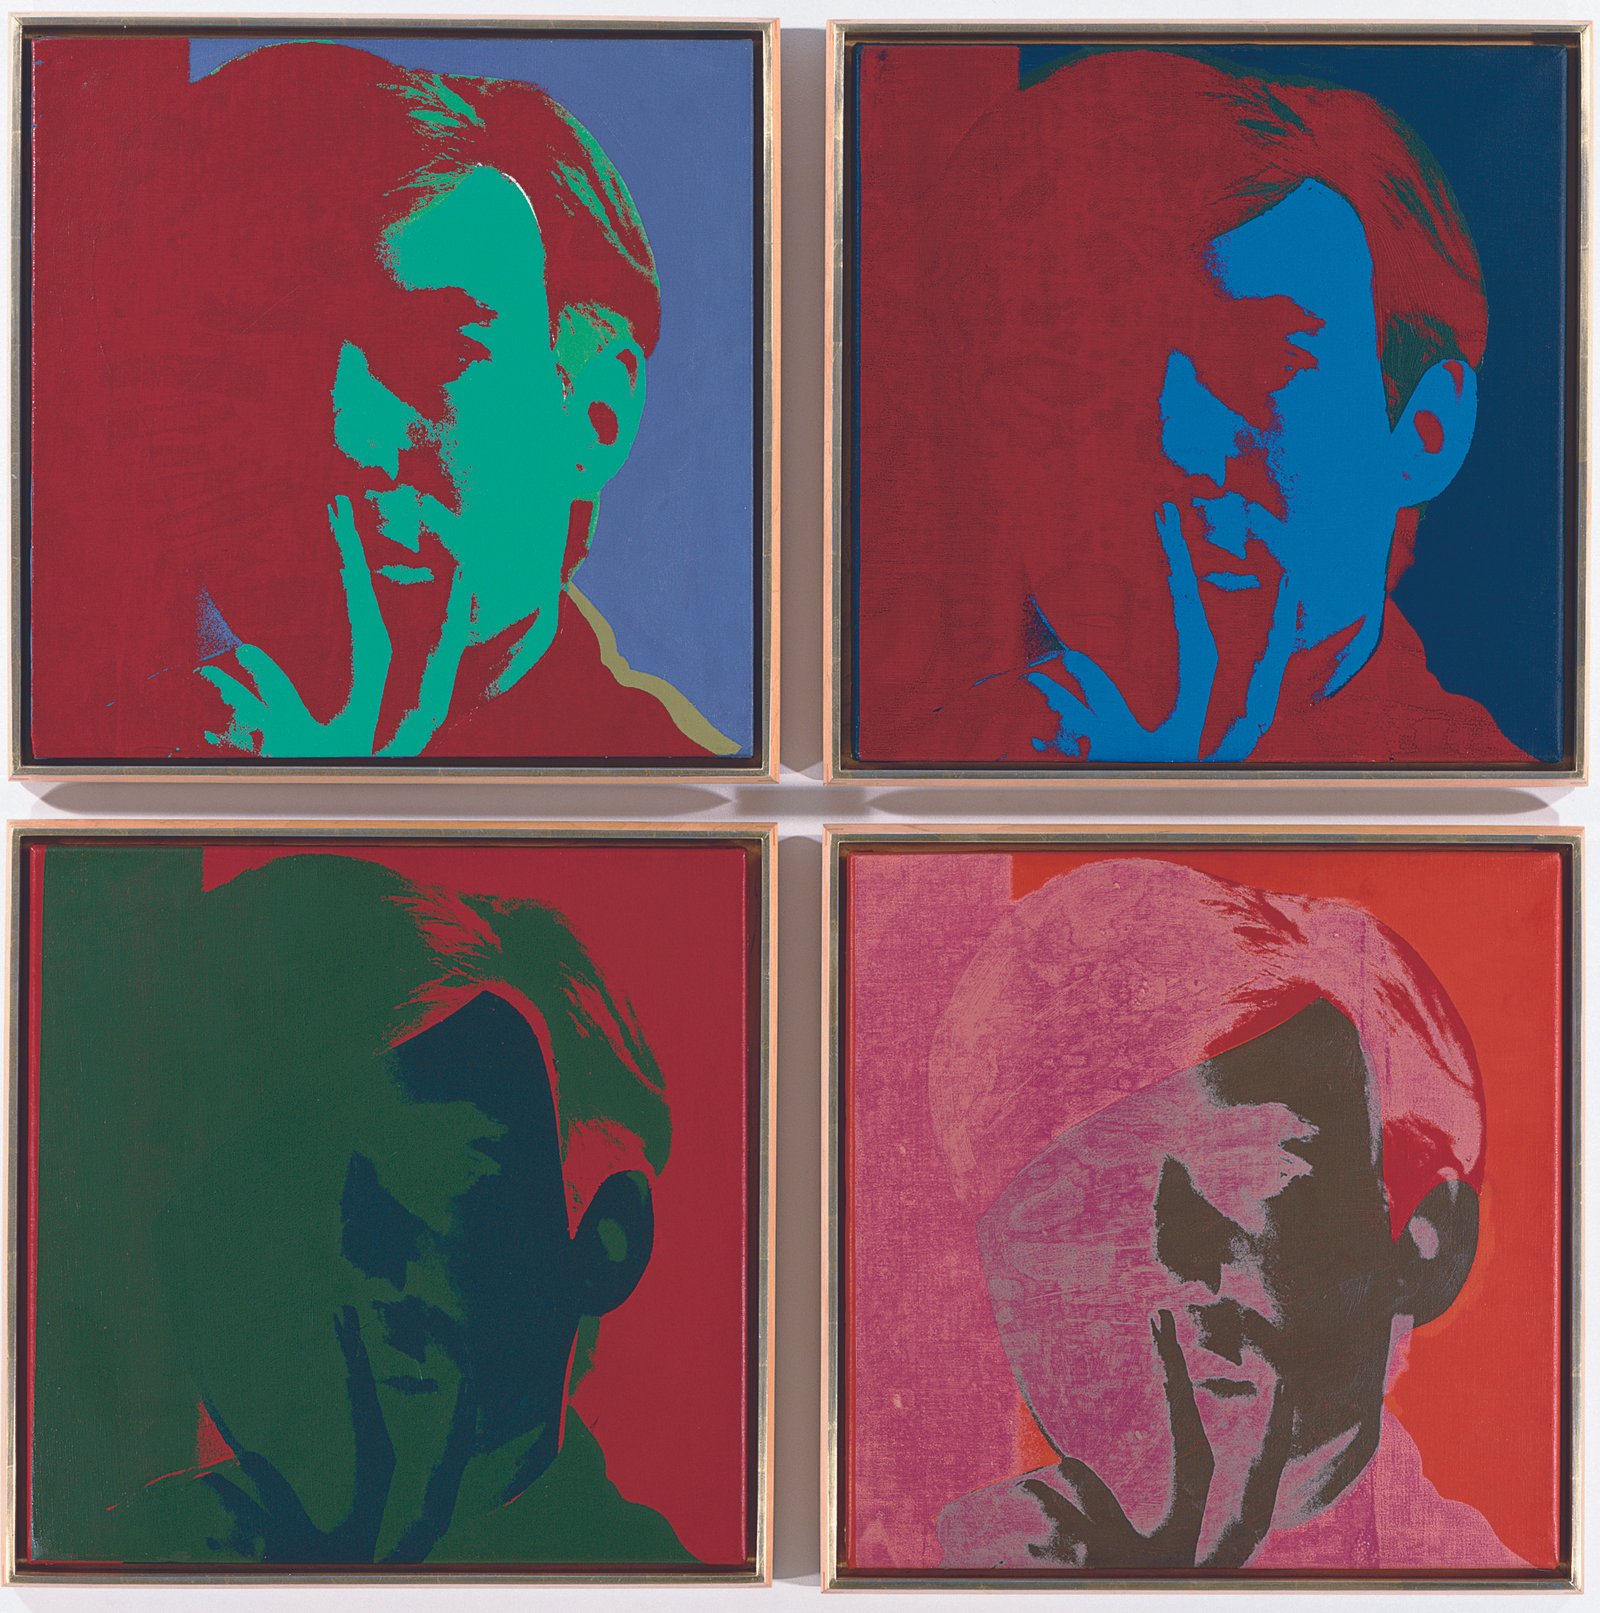 Andy Warhol, Self portrait 1966-7. @ The Andy warhol Foundation for the Visual Arts, Inc. / Licensed by DACS, London.